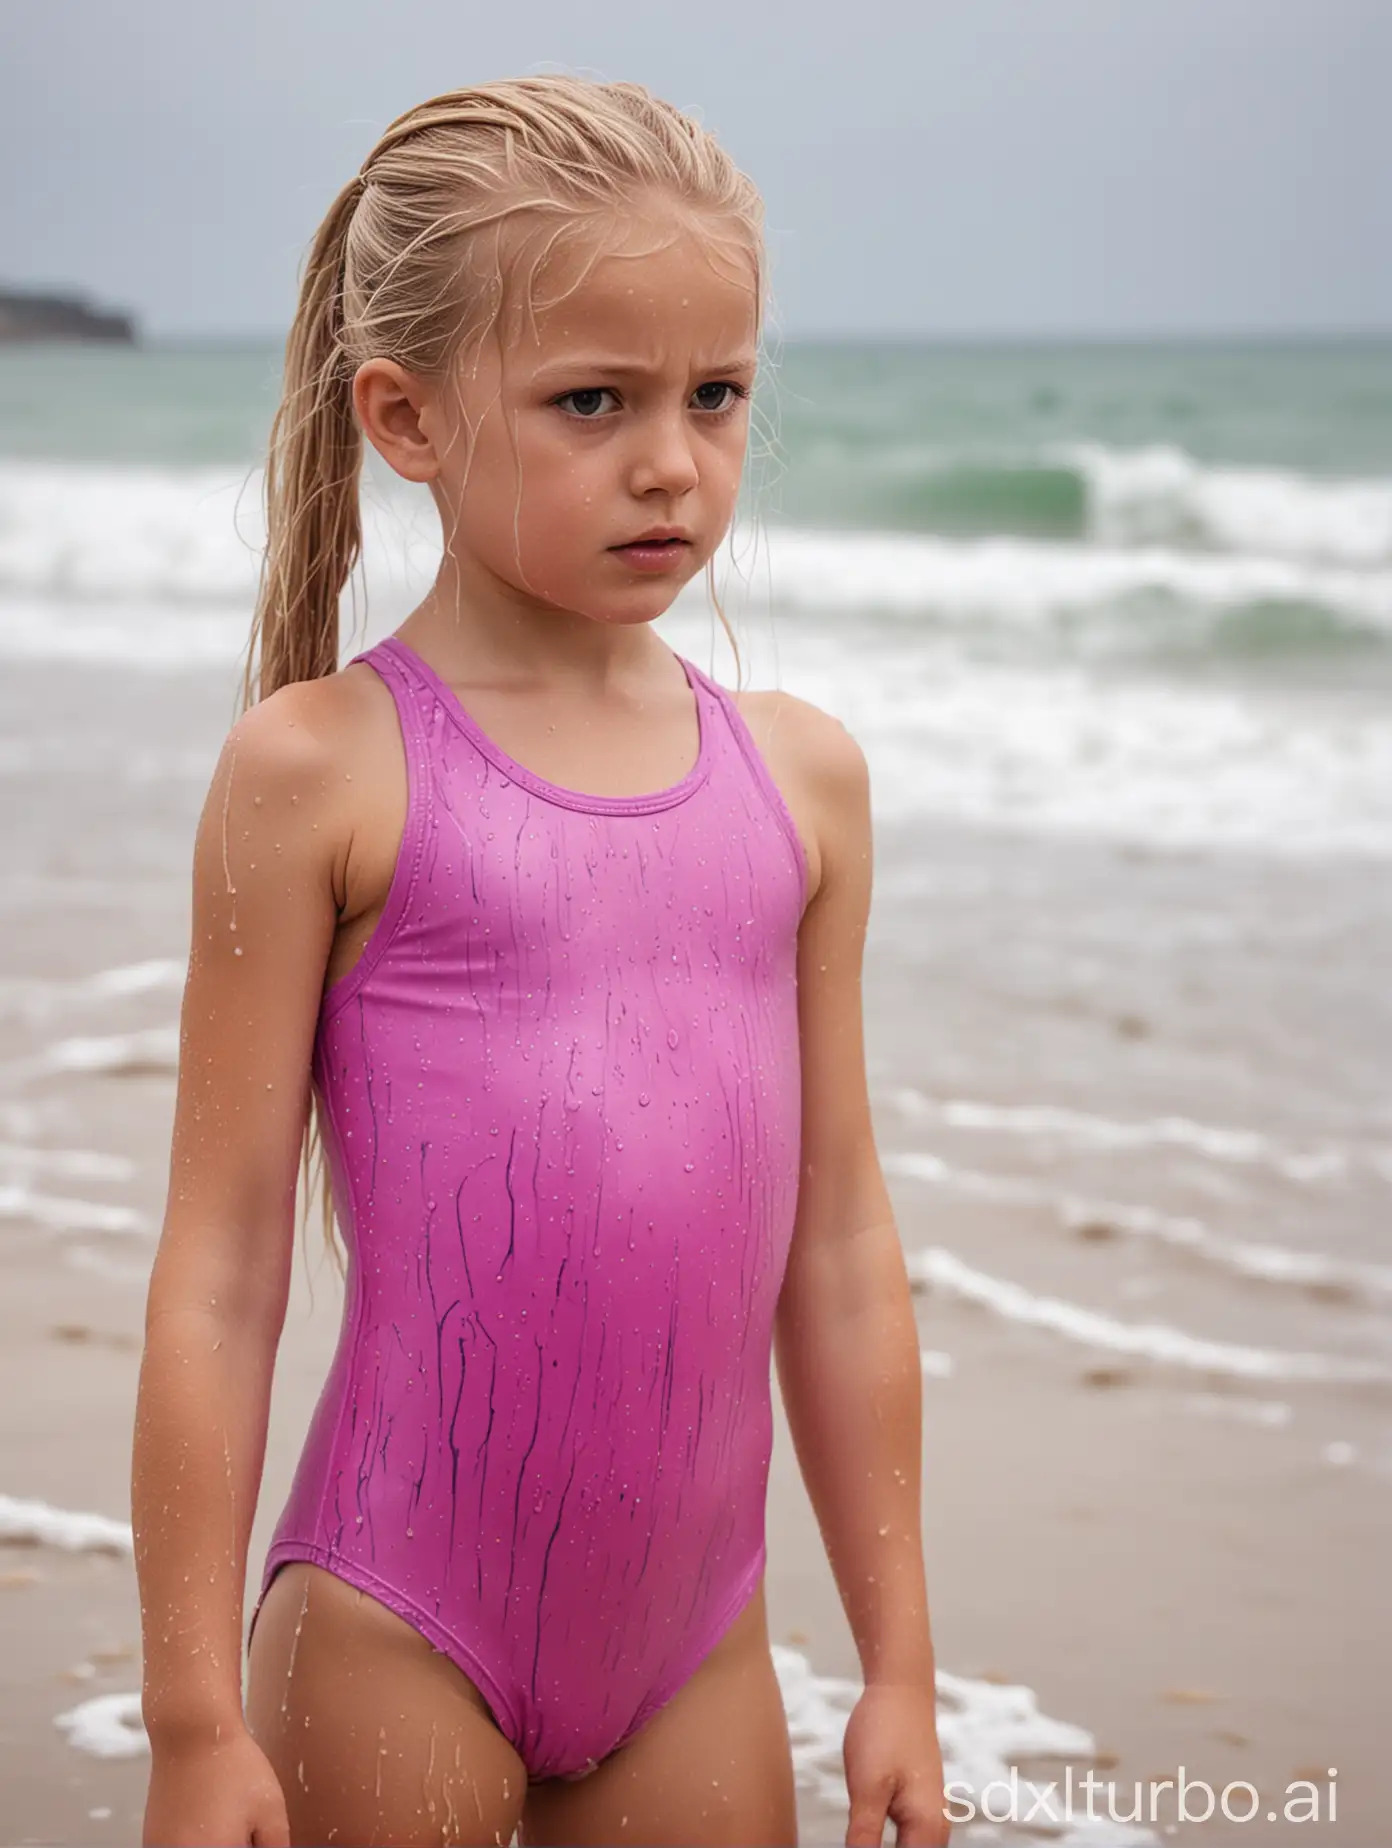 Serious-Blonde-Girl-in-Colorful-Swimsuit-at-Beach